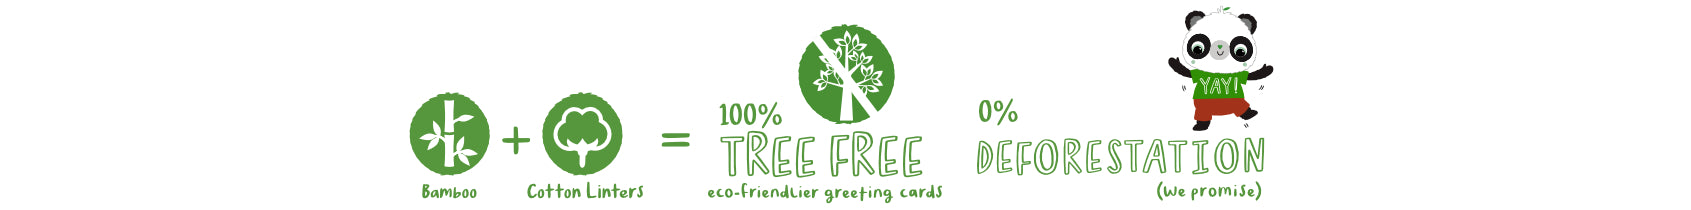 Green icons saying Bamboo + Cotton = 100% Tree Free more eco-friendly greeting cards. 0% Deforestation (we promise)